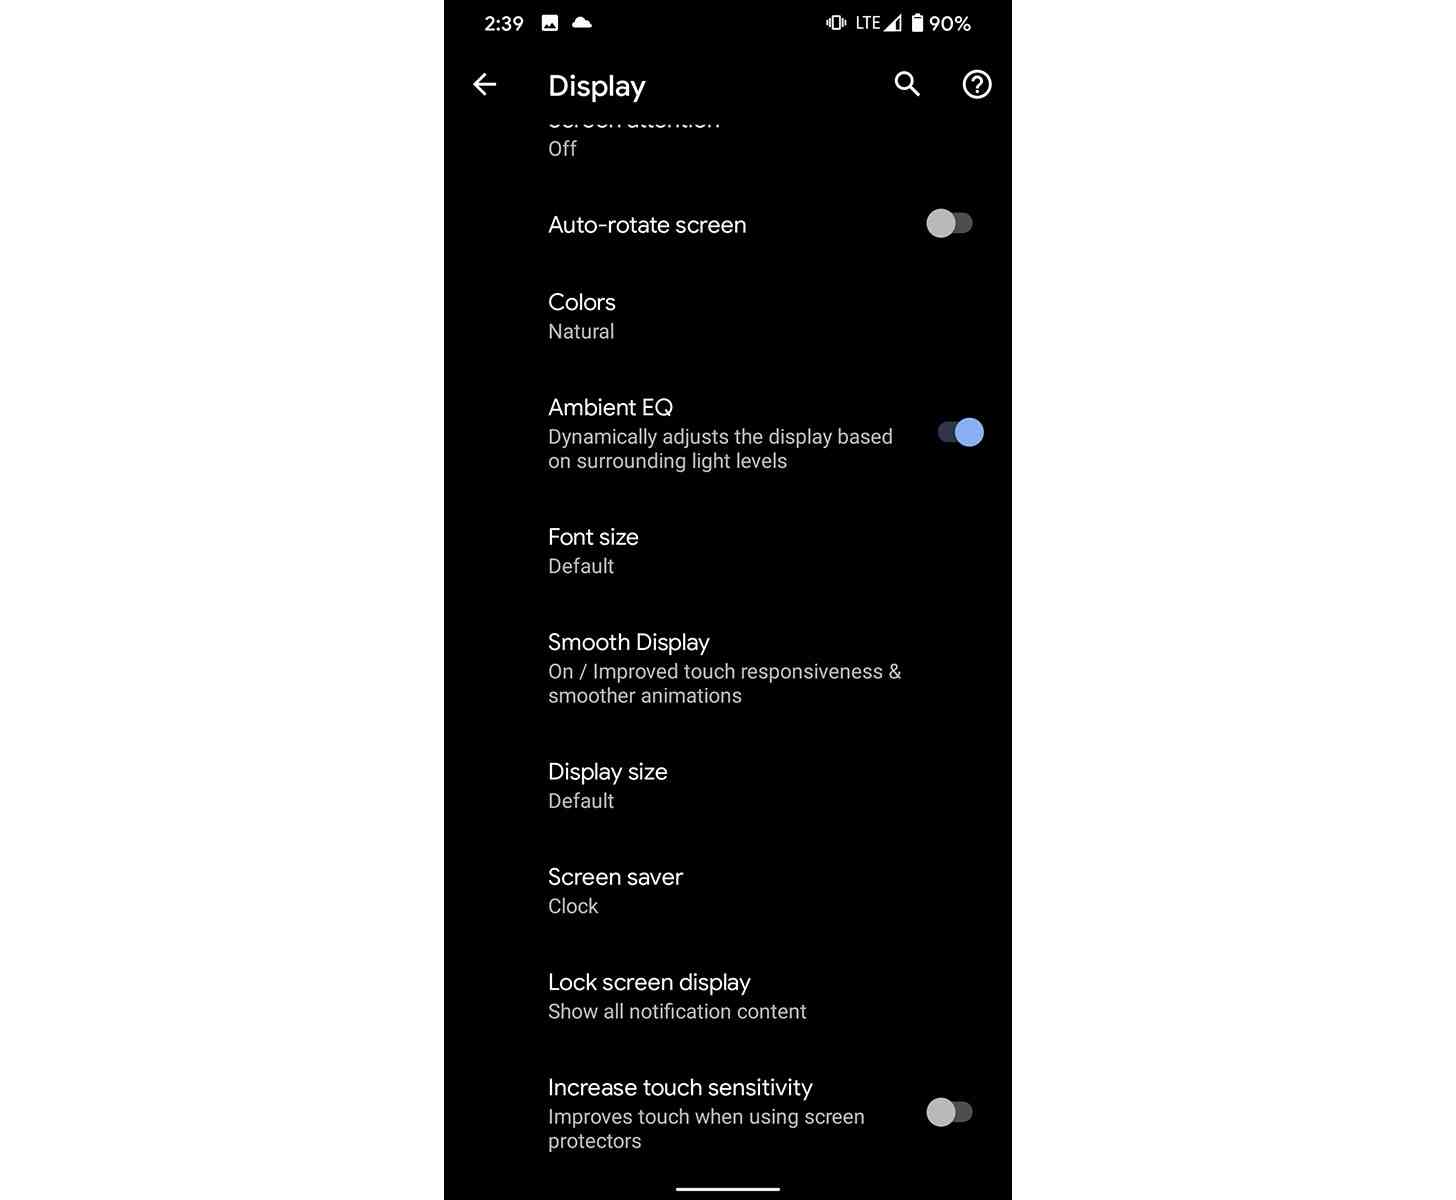 Android 11 increase touch sensitivity